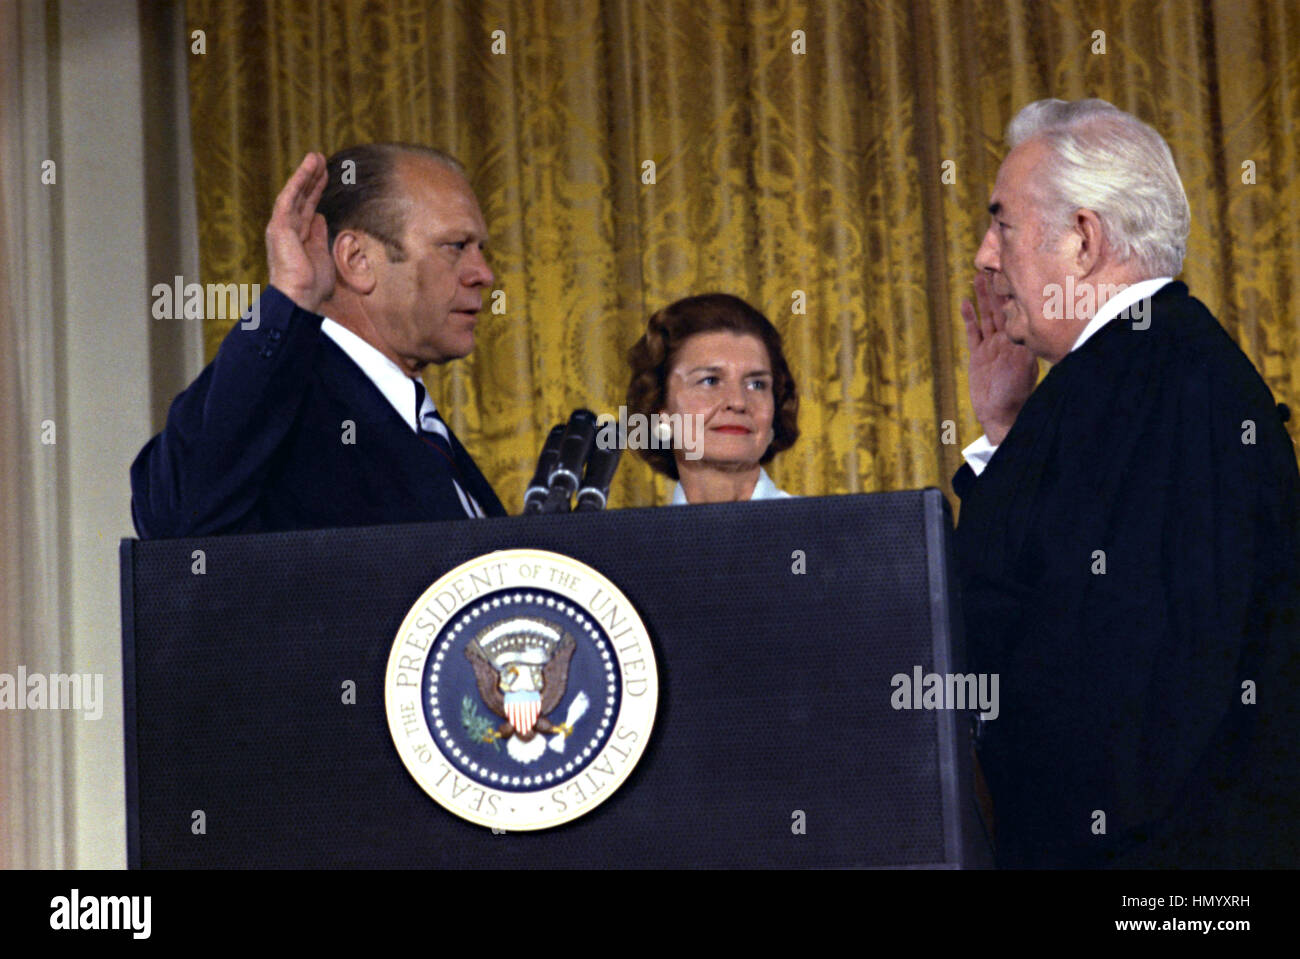 U.S Vice President Gerald Ford takes the oath of office from Supreme Court Chief Justice Warren Burger to become the President of the United States following the resignation of President Richard Nixon in the East Room of the White House August 9, 1974 in Washington, DC. Stock Photo